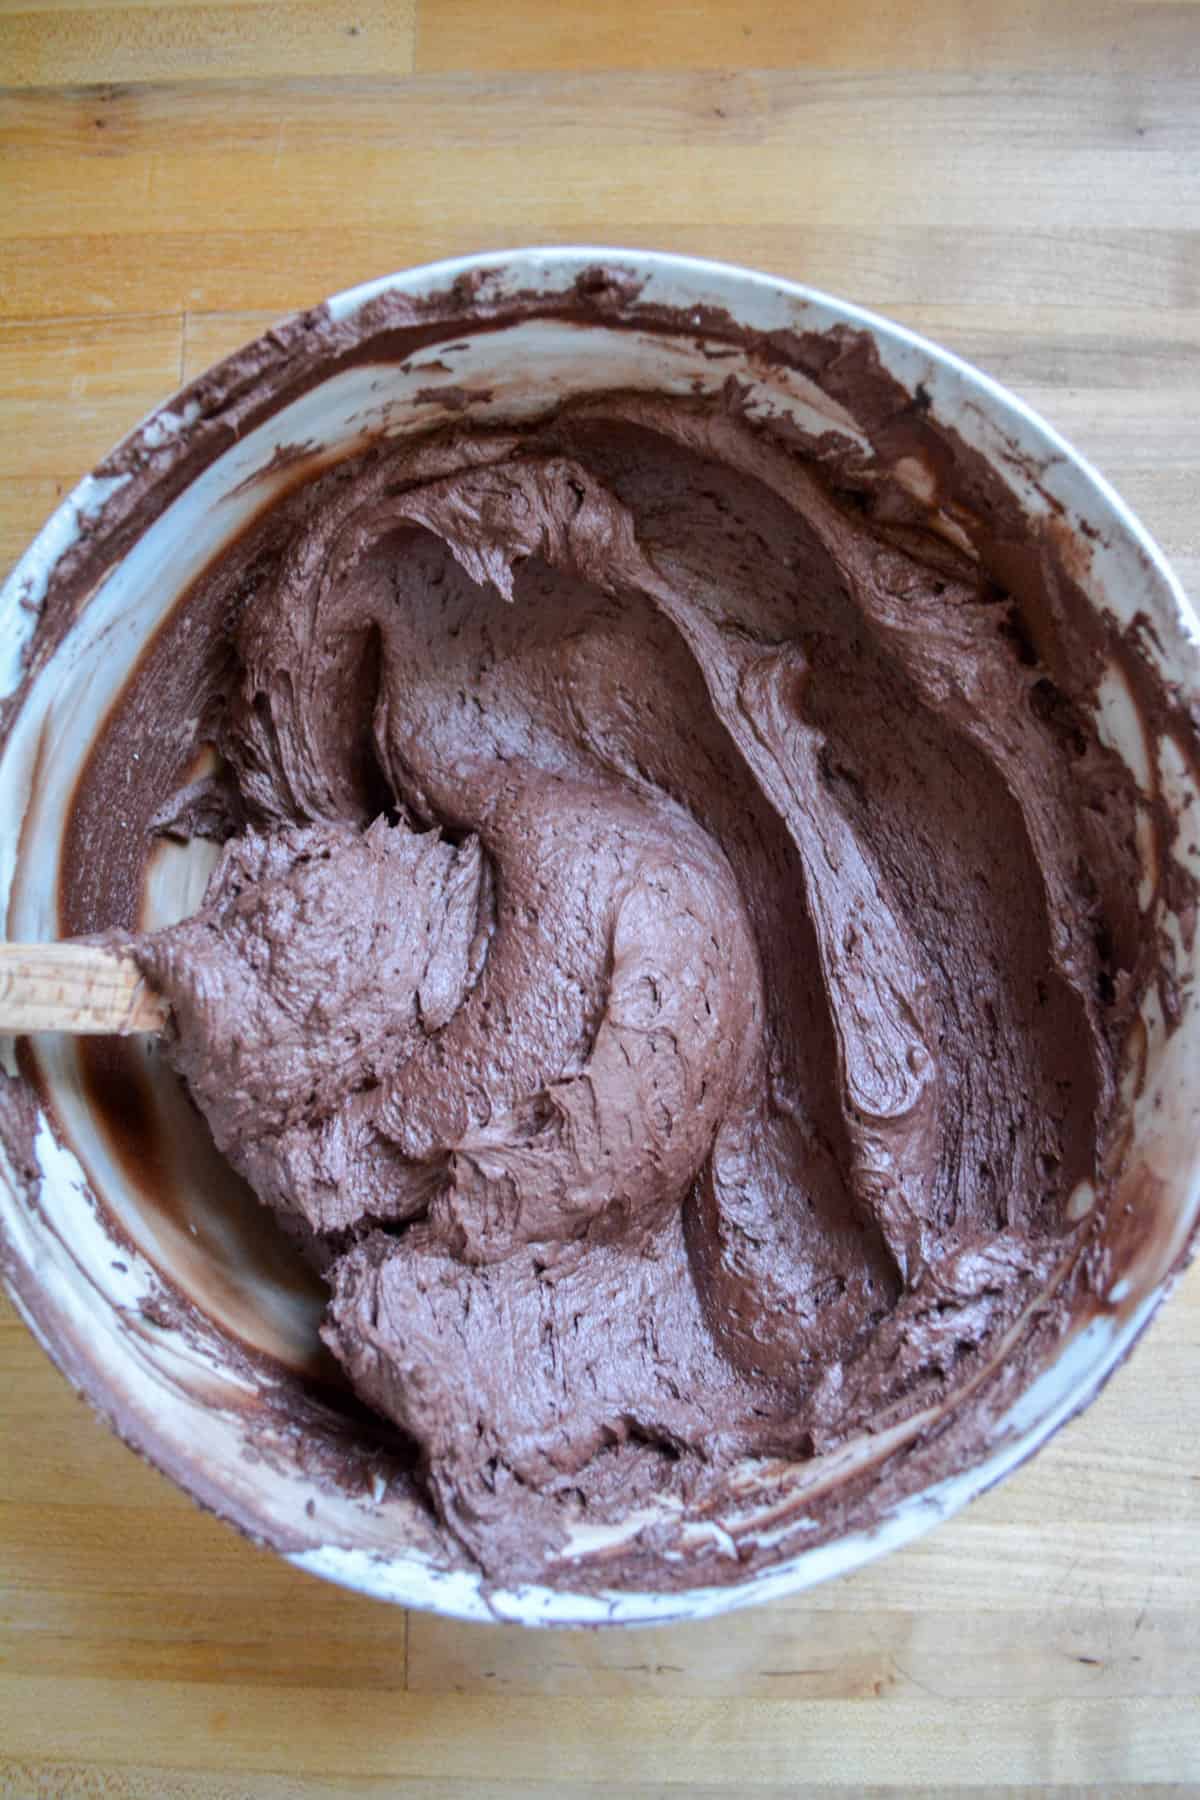 The finished Vegan Chocolate Buttercream Frosting in a marble bowl with a spatula in it.